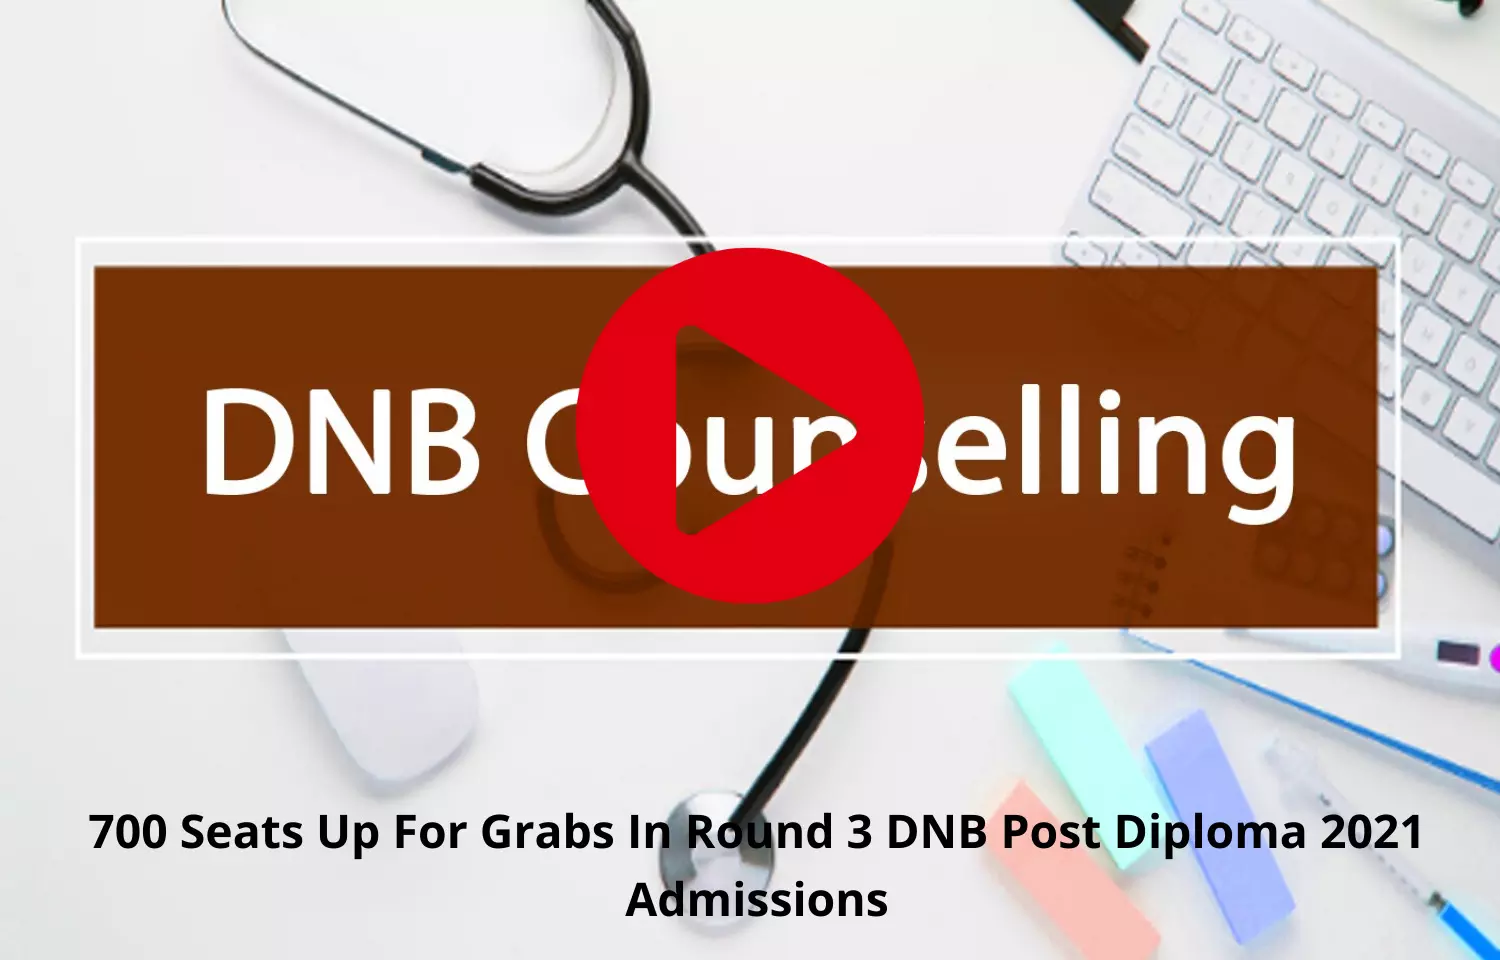 700 Seats Up For Grabs In Round 3 DNB Post Diploma 2021 Admissions